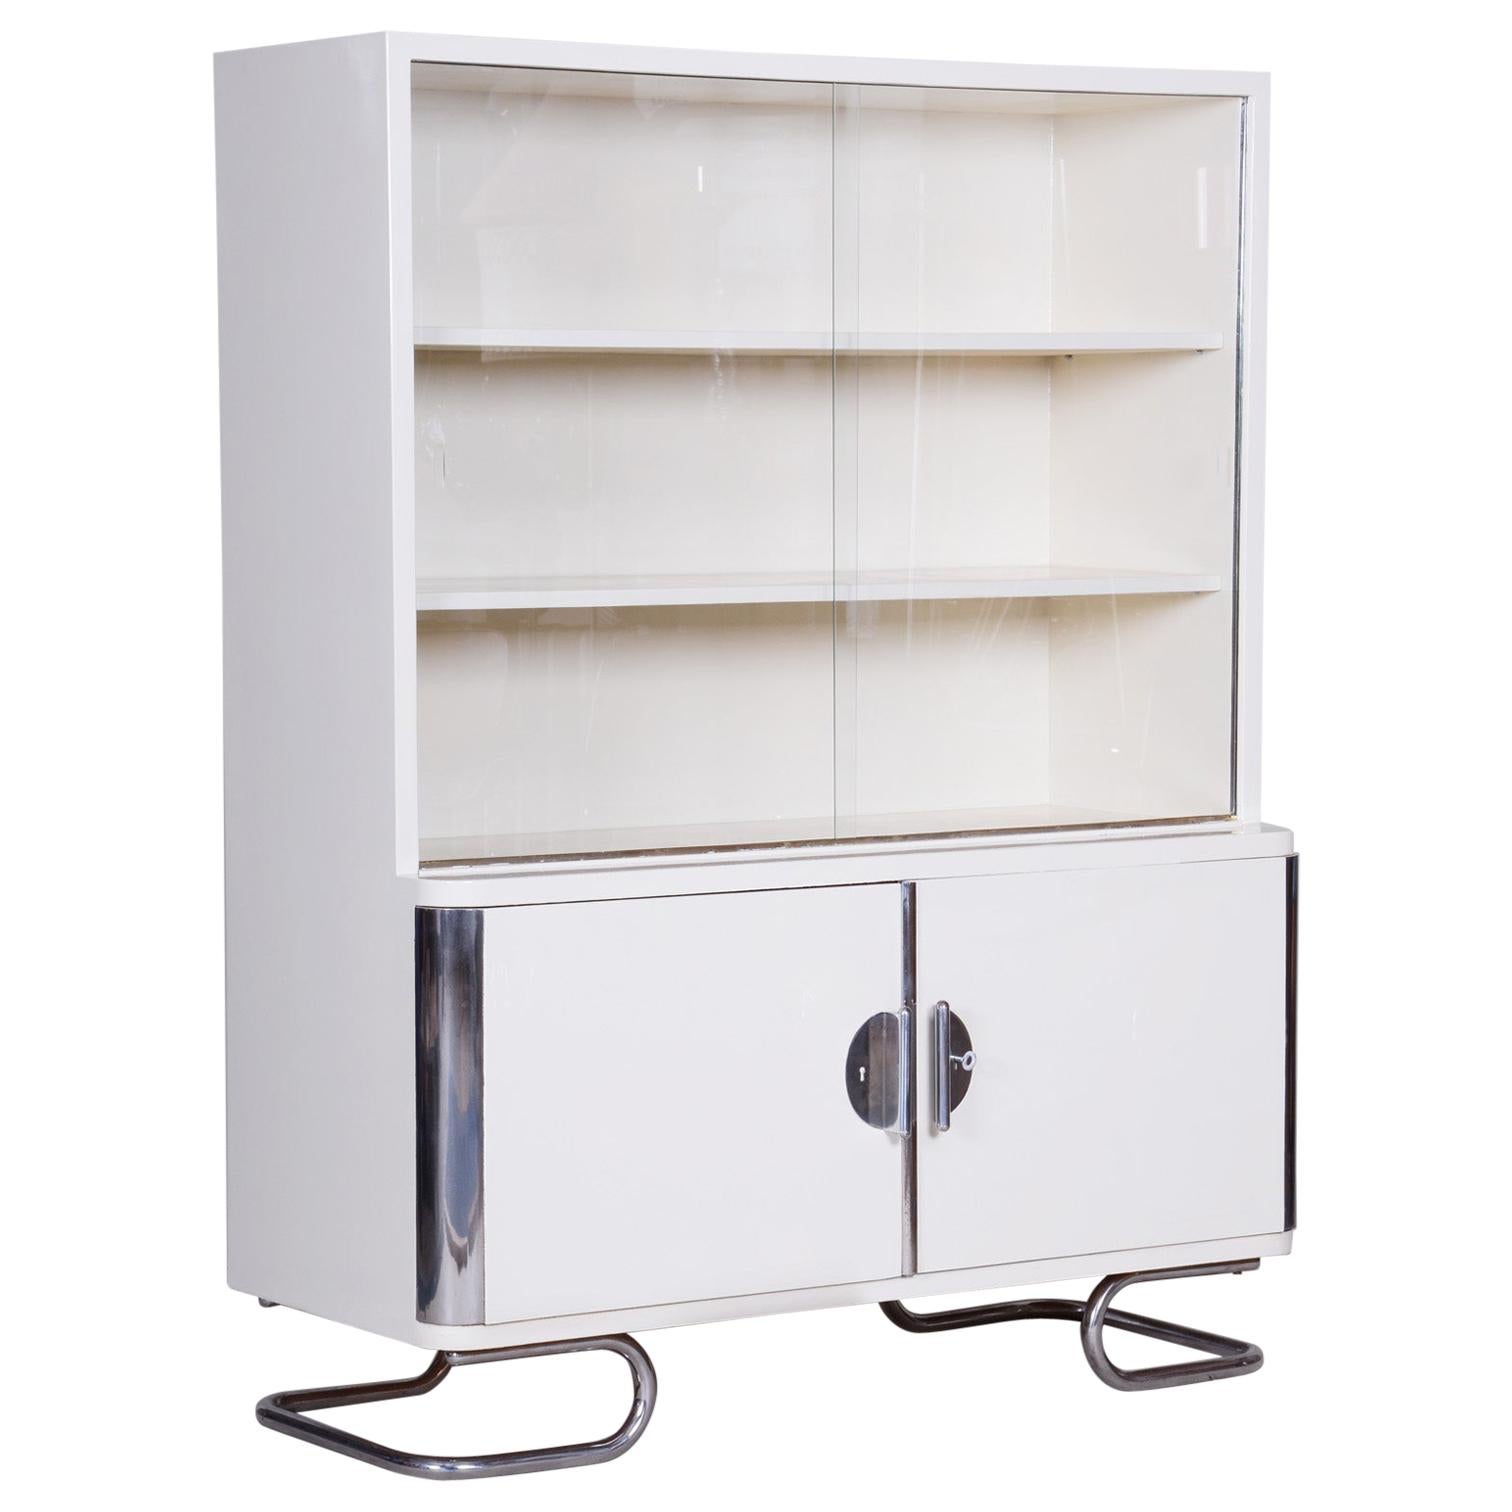 White Vintage Chrome Bauhaus Bookcase Manufactured by Vichr and Spol, 1930s For Sale